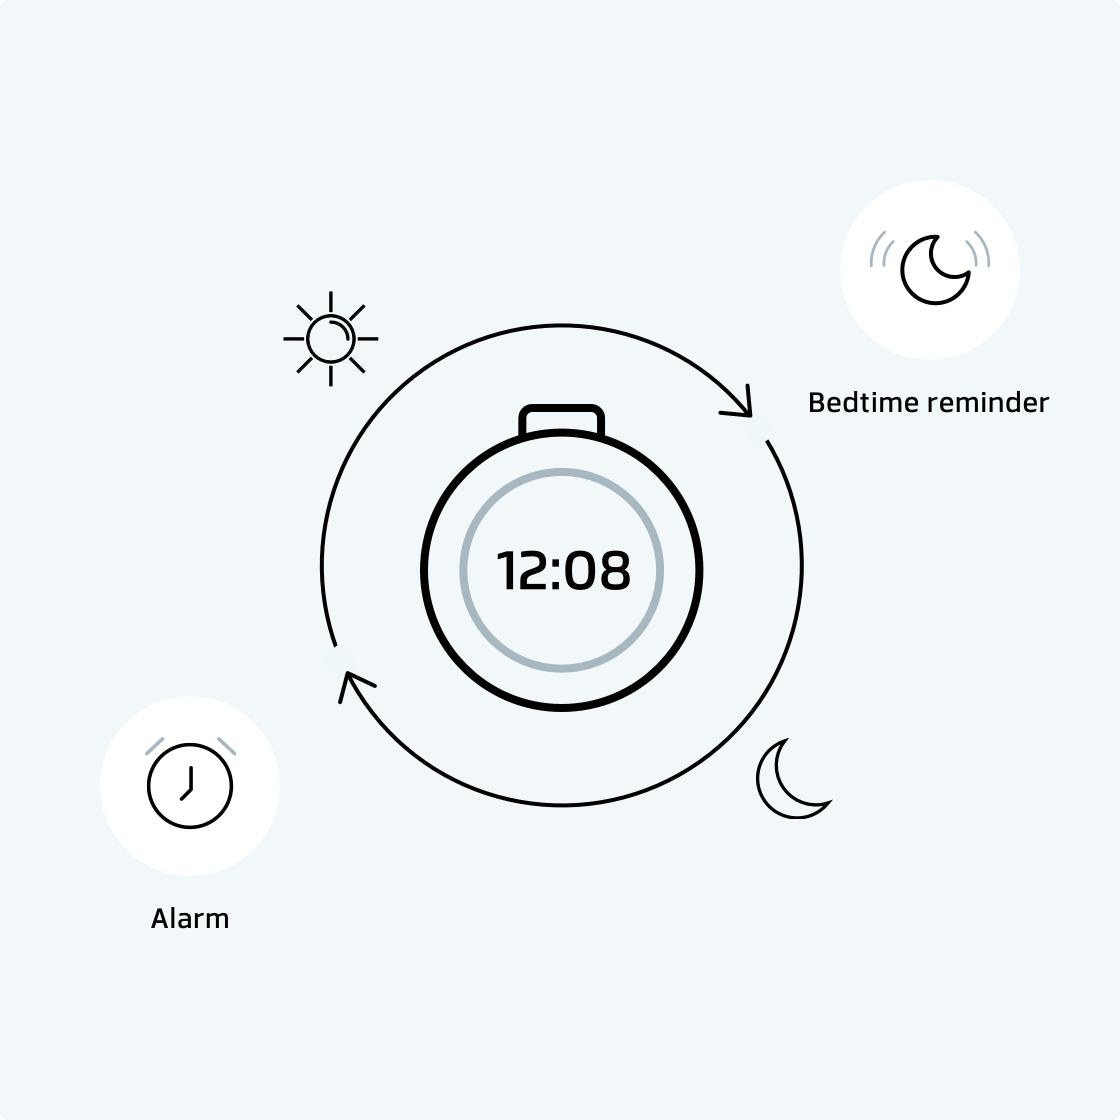 Maximize the benefits of sound sleep with our Bedtime reminder feature